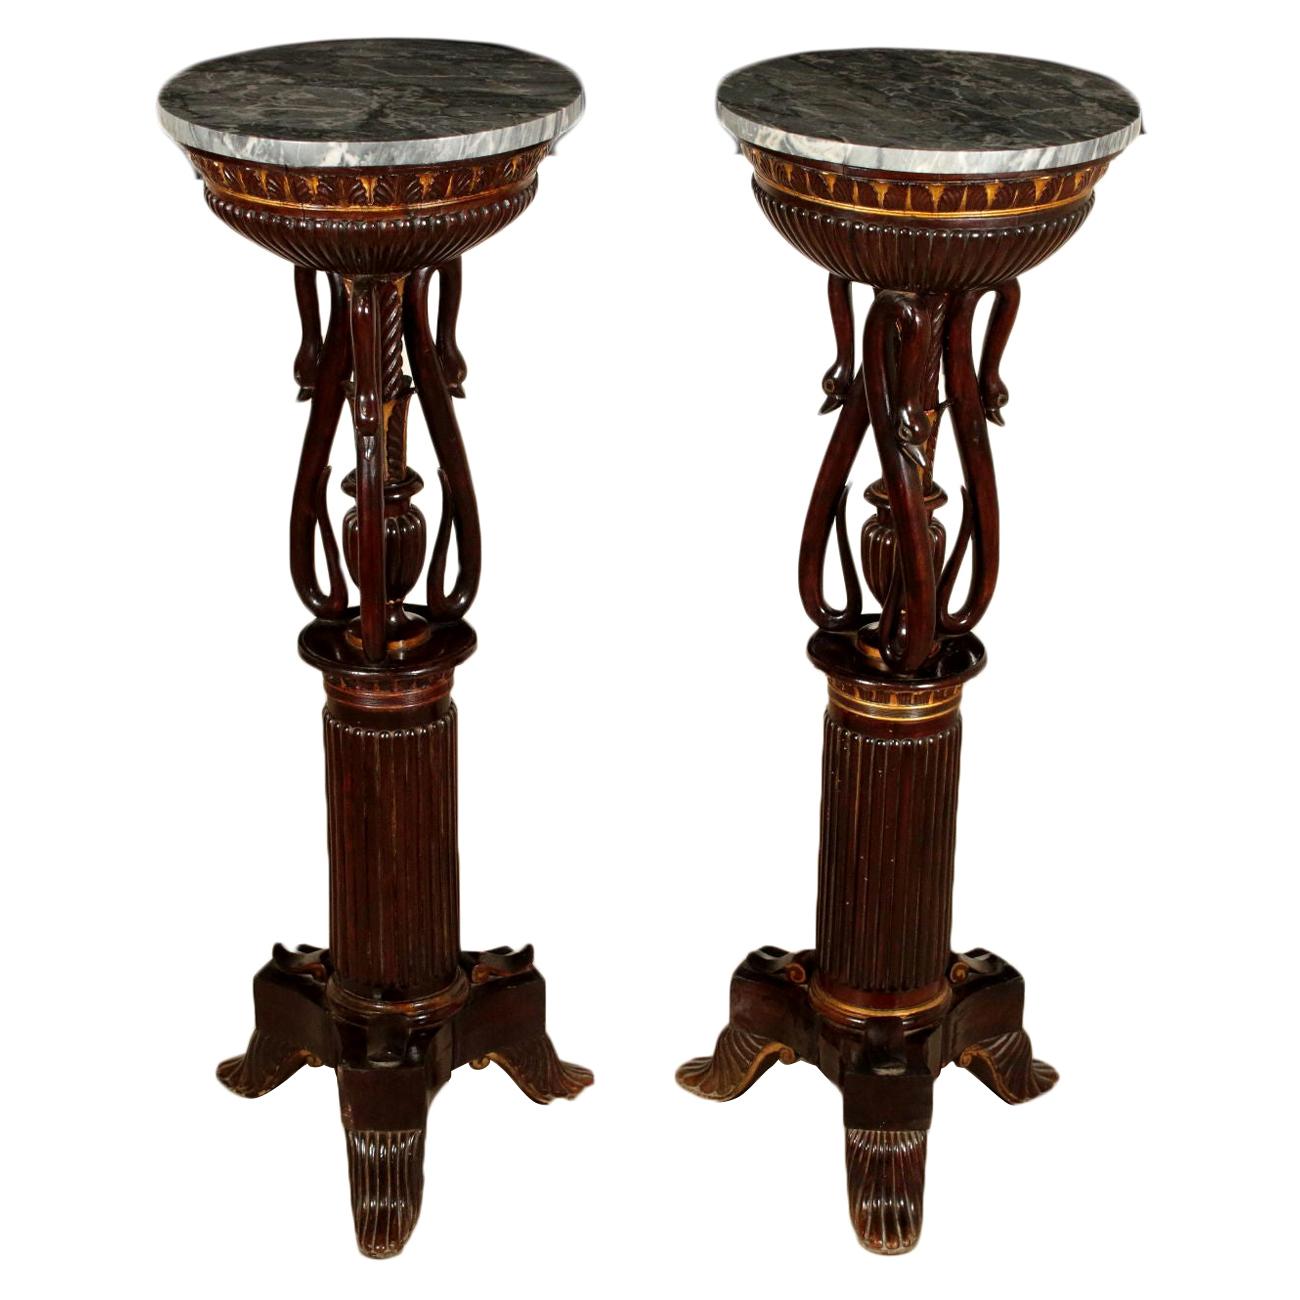 Pair of Restoration Mahogany Gueridons, Italy, First Quarter of the 1800s